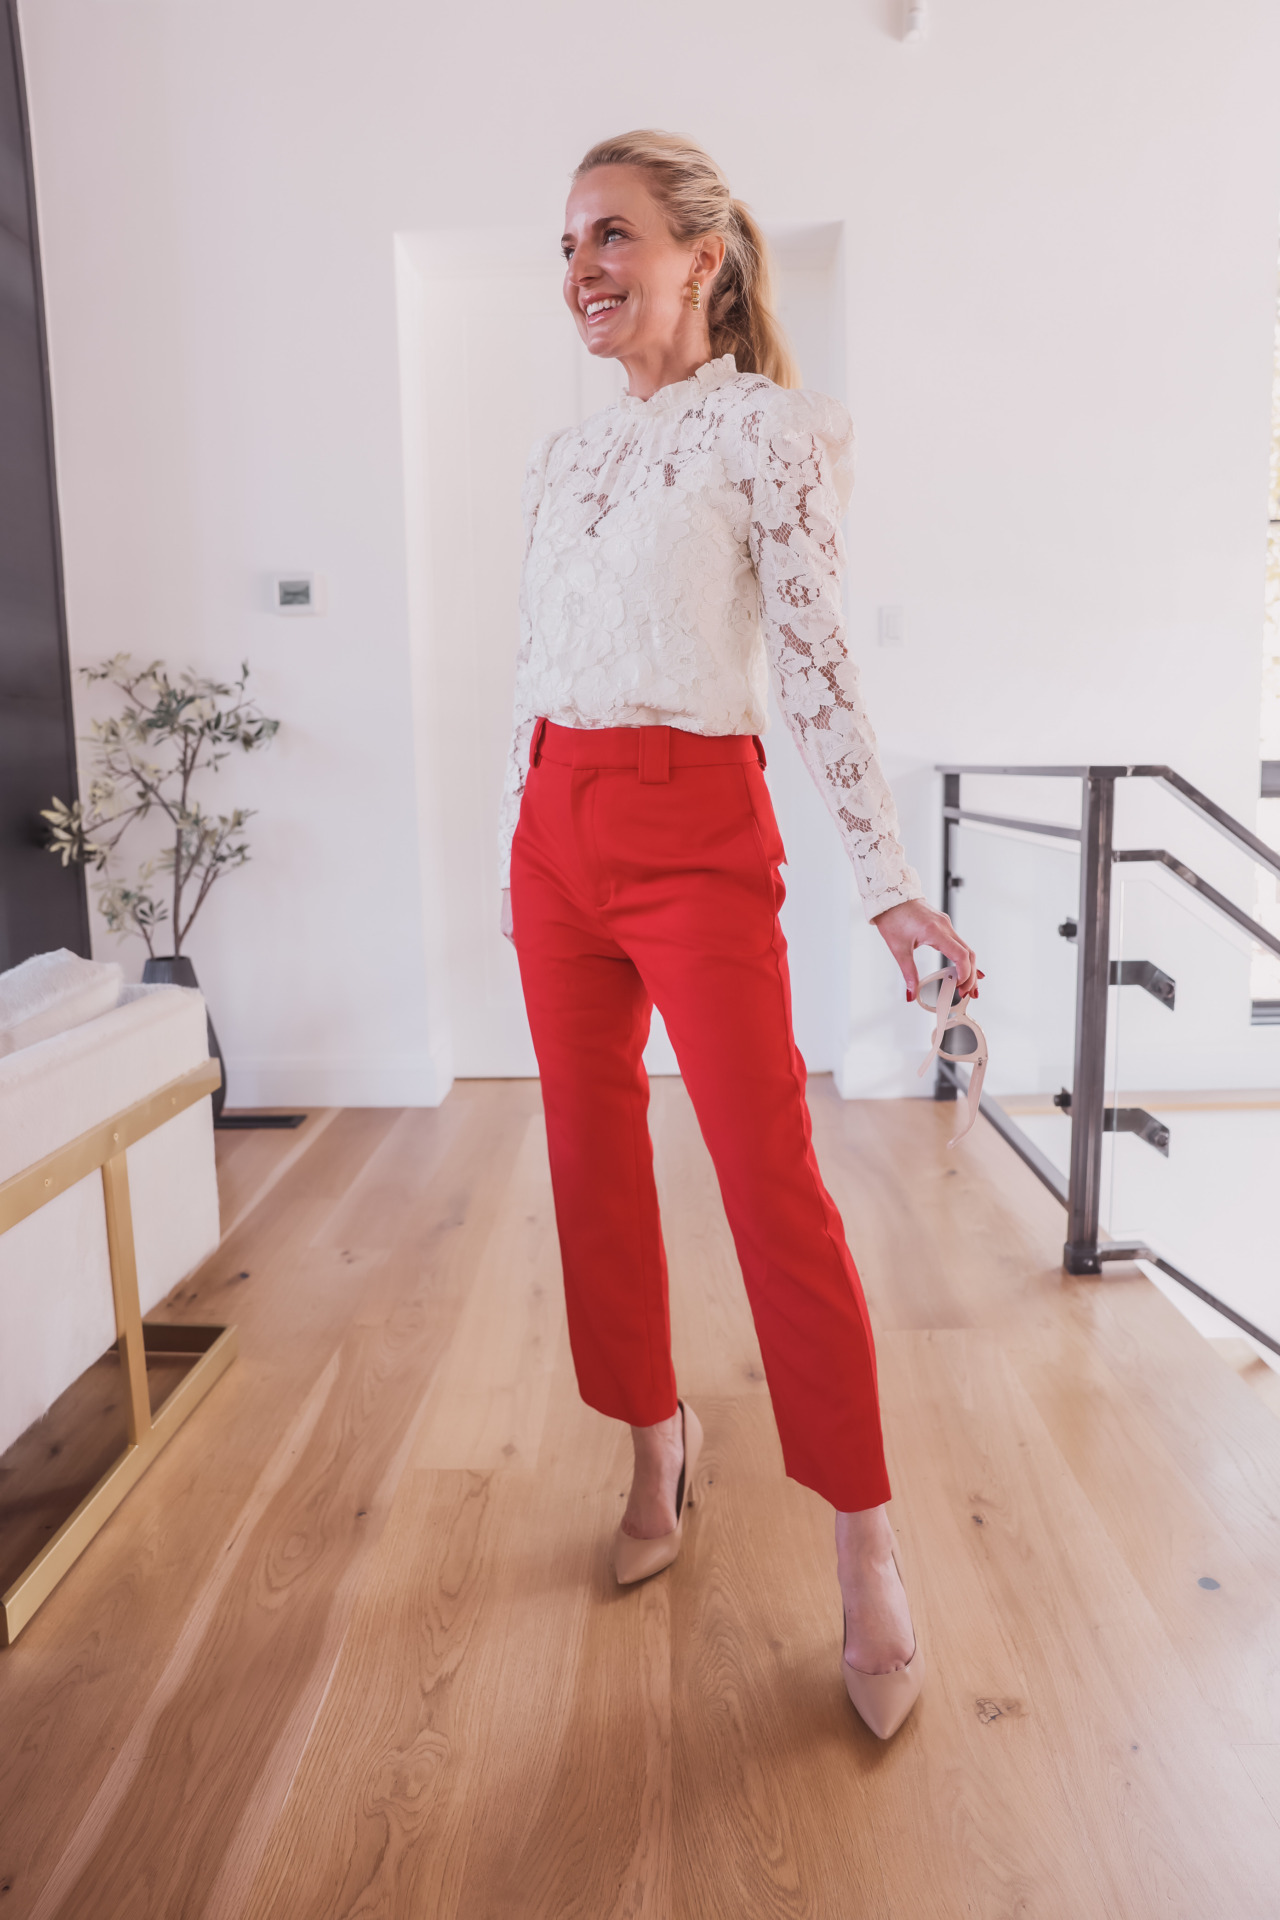 Lace Blouse & Red Pants